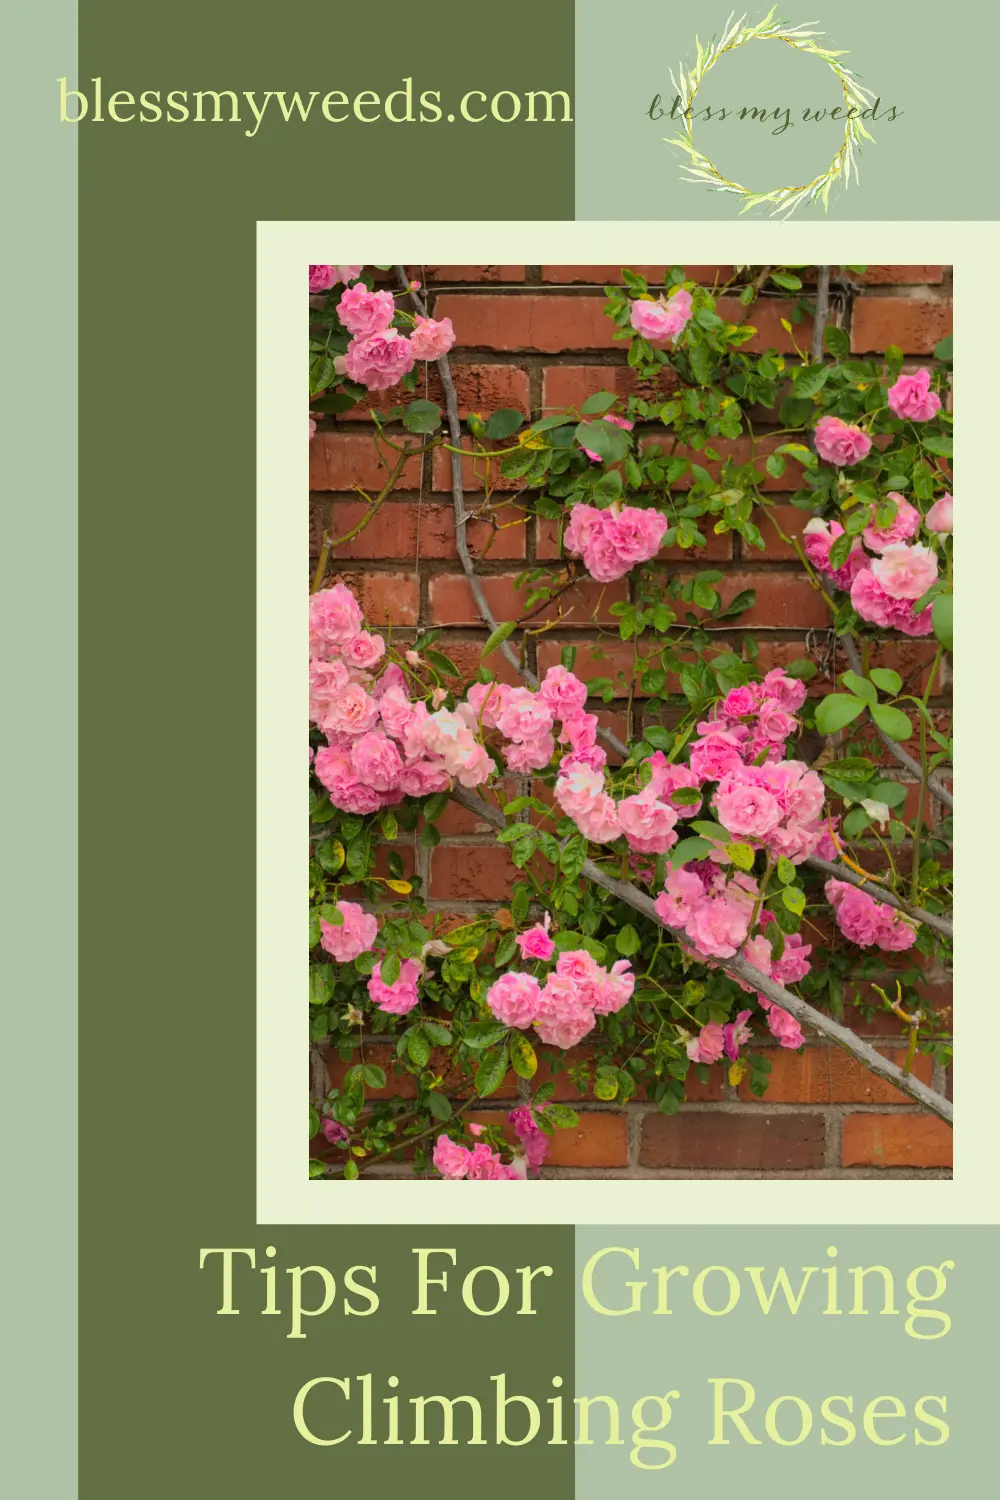 Blessmyweeds.com has all the best ideas and inspo for a perfect yard and garden. If you're looking for an elegant addition to your home landscaping, consider climbing roses. Find out simple ways you can grow perfect climbing roses at your home!